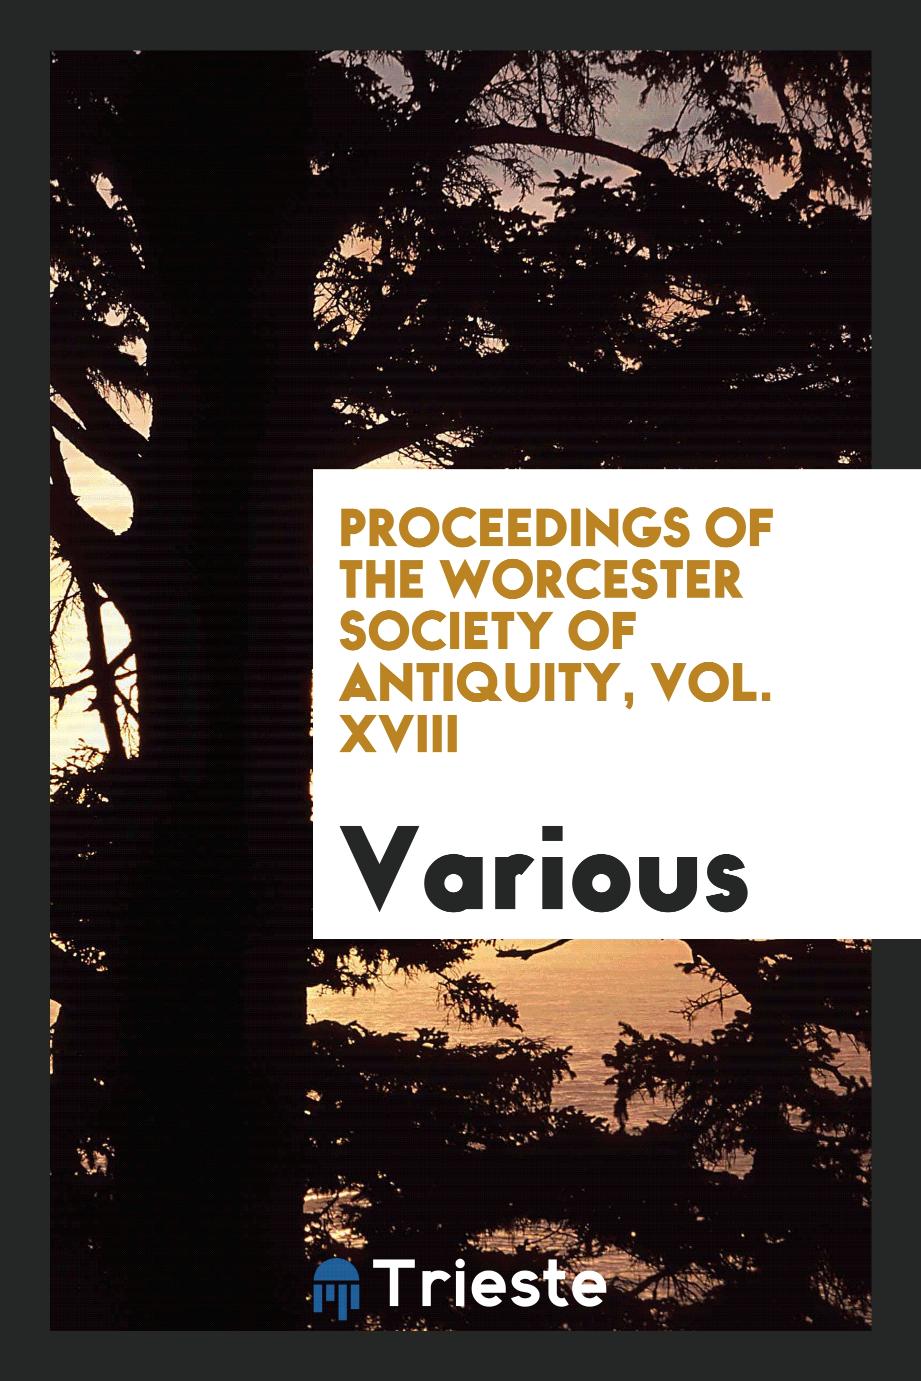 Proceedings of the Worcester Society of Antiquity, Vol. XVIII